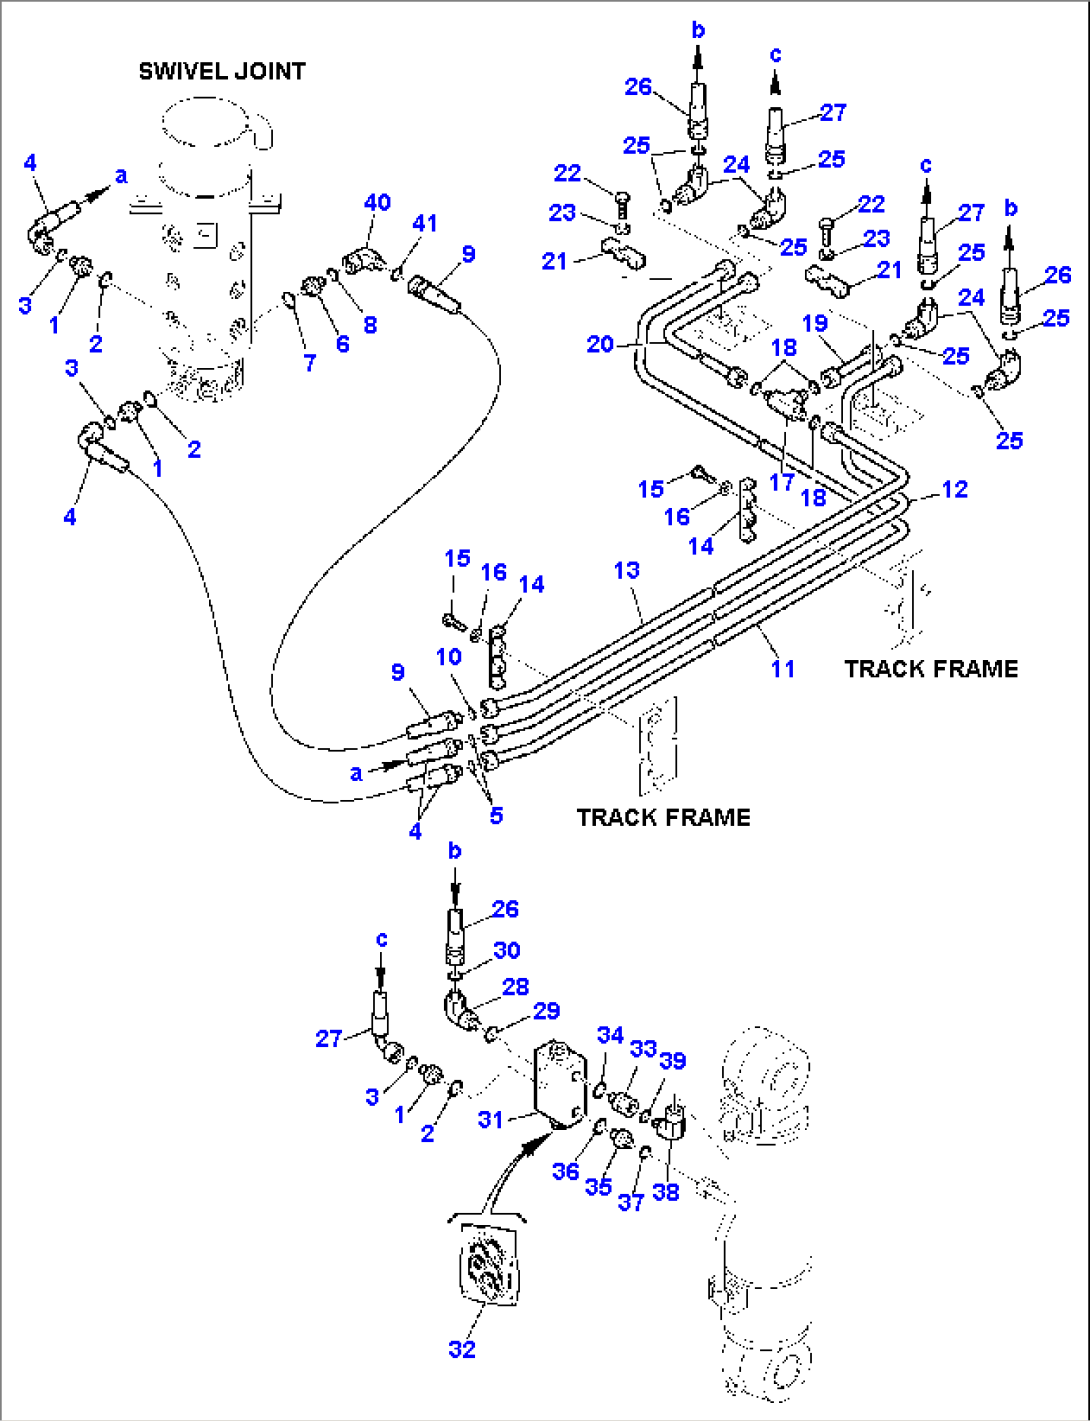 HYDRAULIC PIPING (REAR OUTRIGGER)